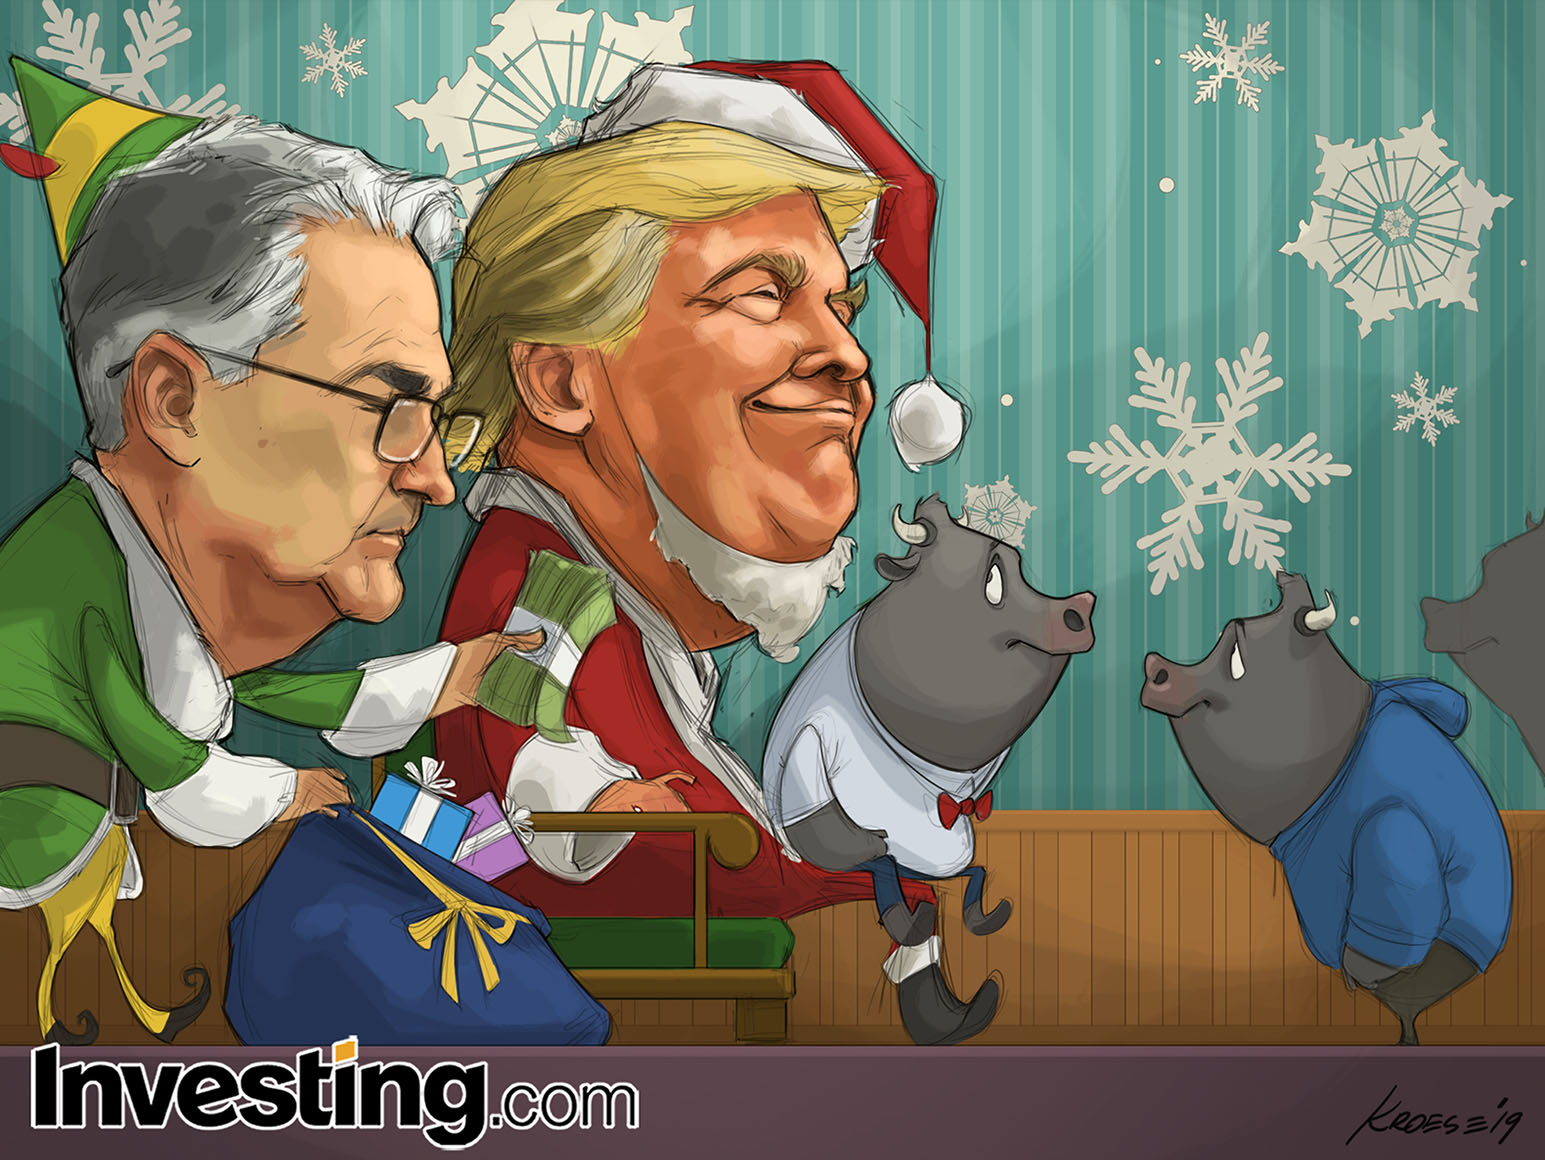 Merry Christmas and Happy Holidays From Investing.com!